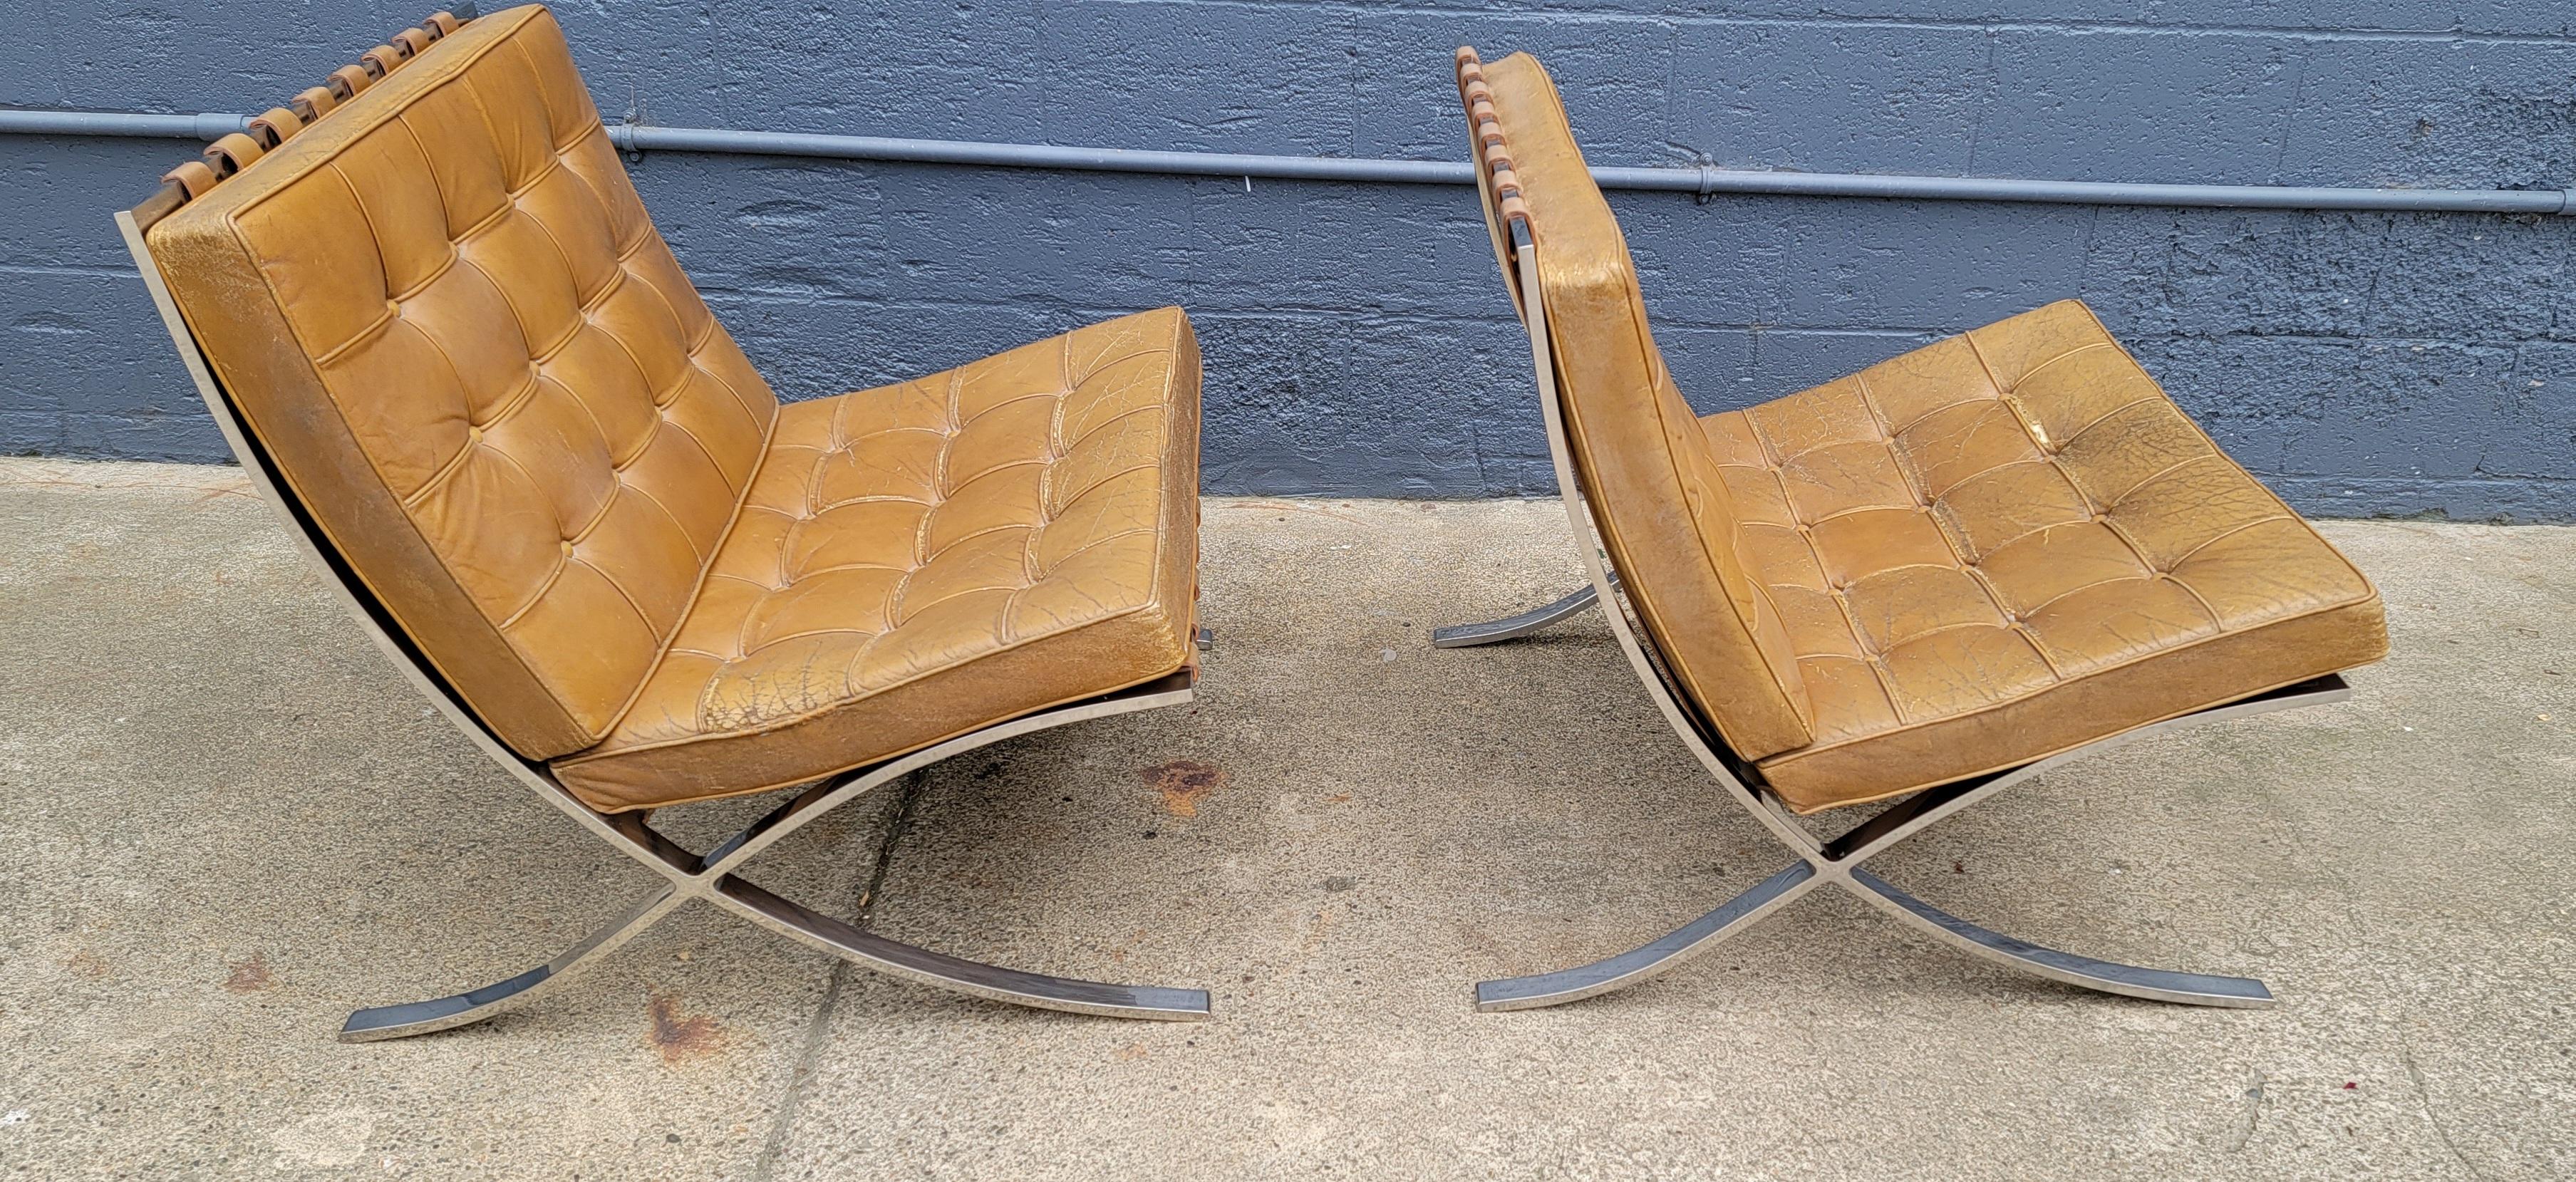 Stainless Steel Mies Van Der Rohe for Knoll Barcelona Chairs a Pair circa, 1960's